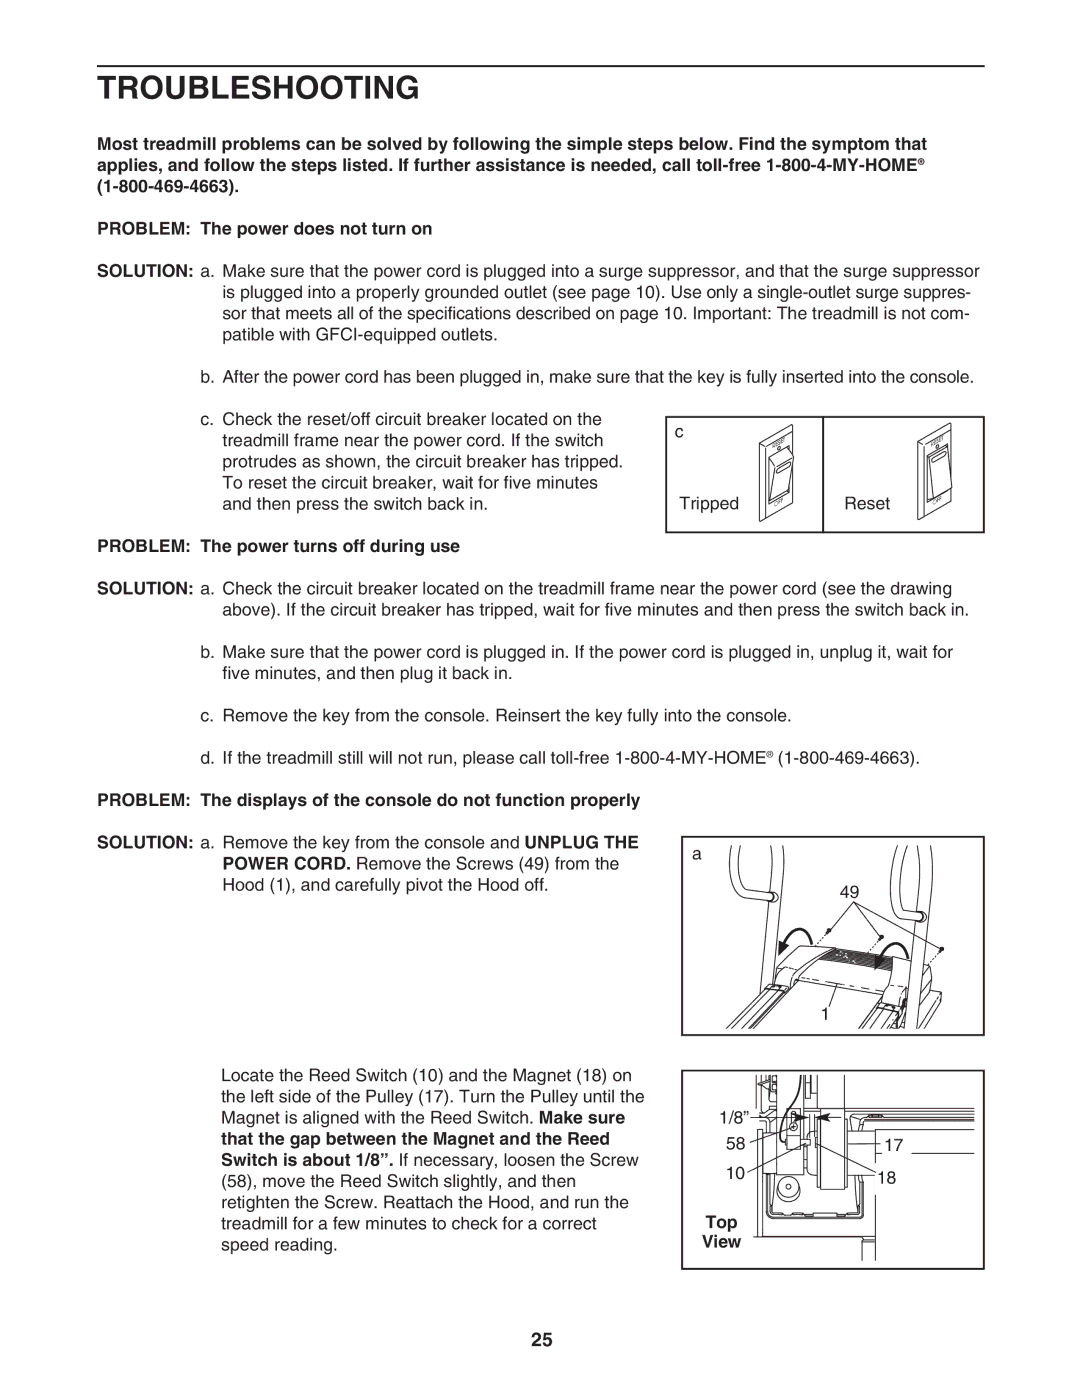 ProForm 831.295550 user manual Troubleshooting, Problem The power turns off during use, Top 